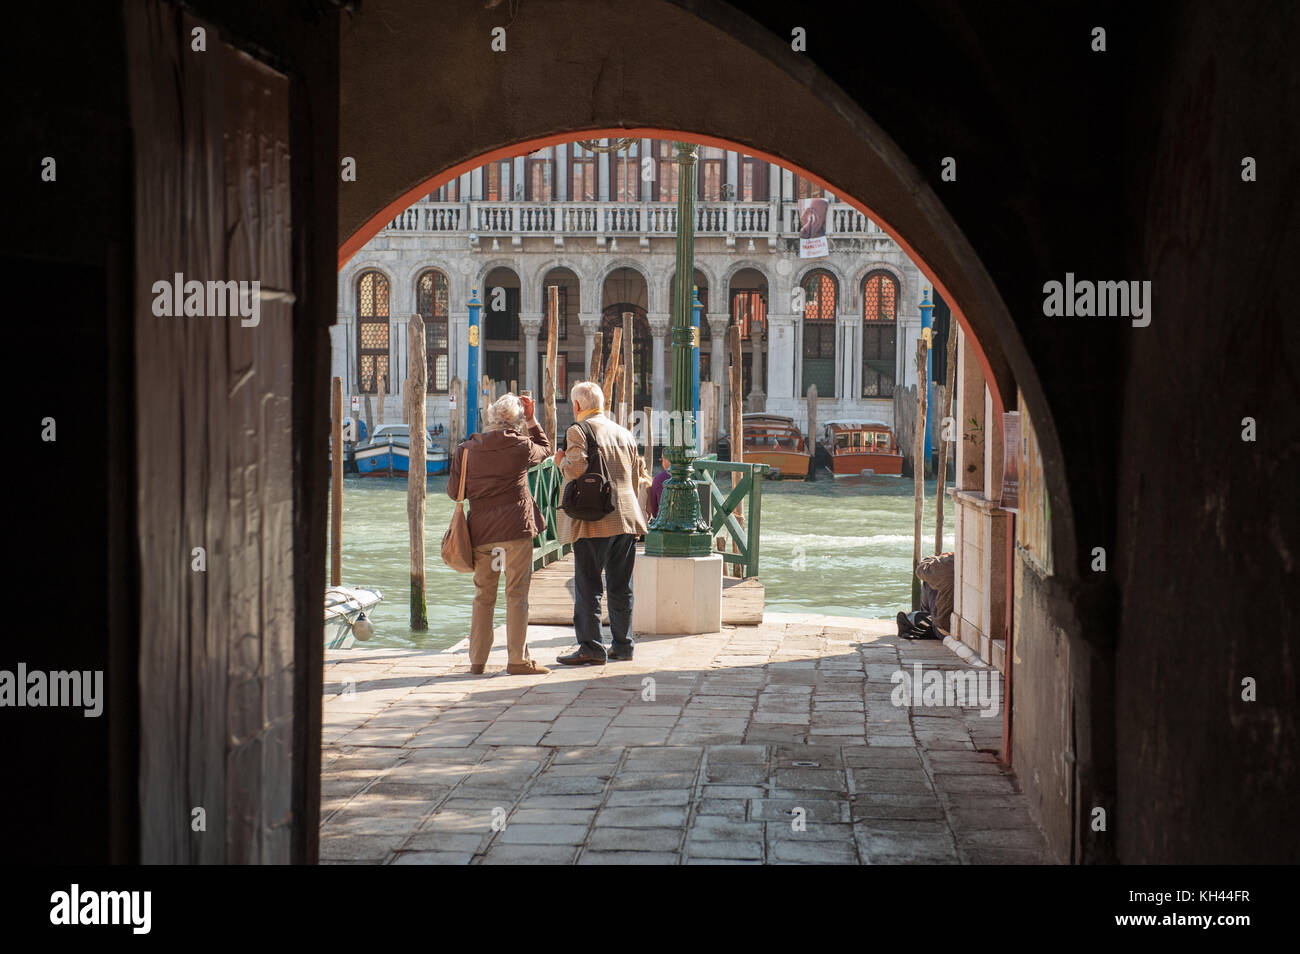 Tourists waiting for the Vaporetto at Grand Canal in Venice, Italy. Venice is a major tourist destination in Italy. Stock Photo